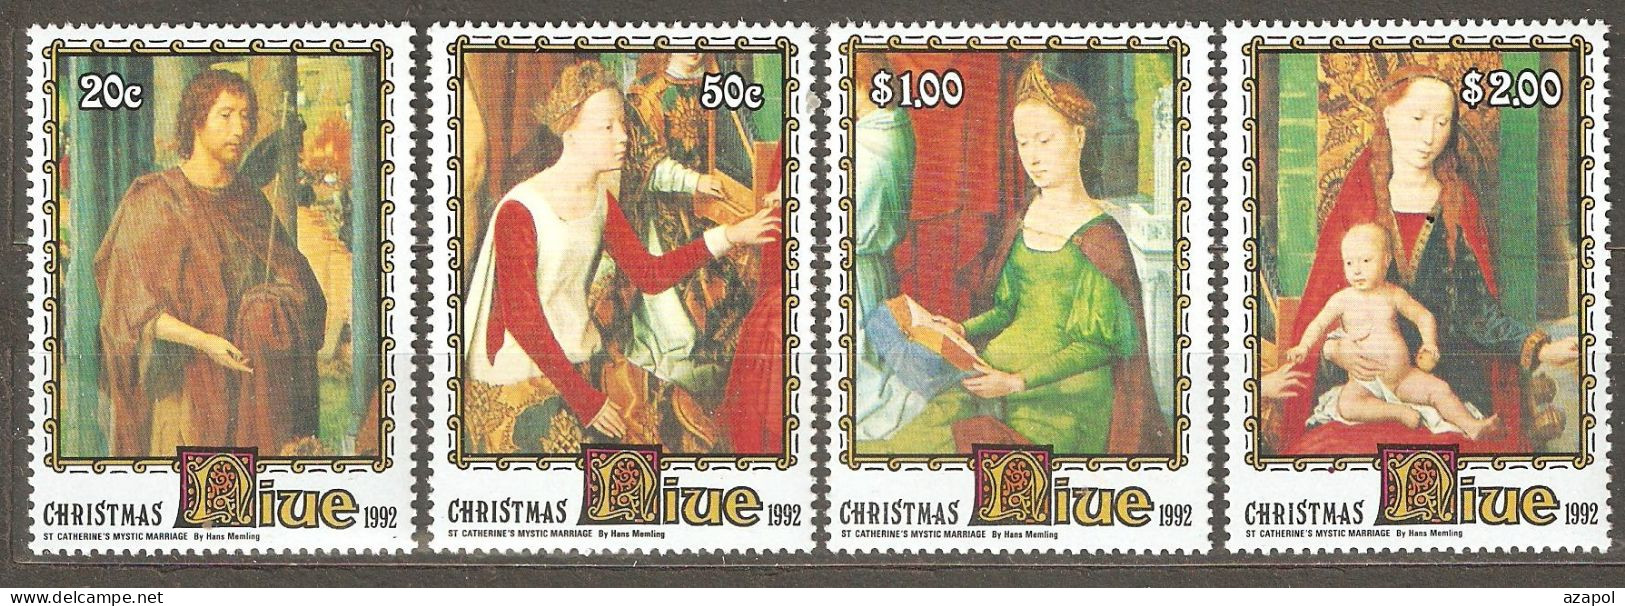 Niue: Full Set Of 4 Mint Stamps, Christmas - Paintings By H.Memling, 1992, Mi#813-6, MNH - Niue